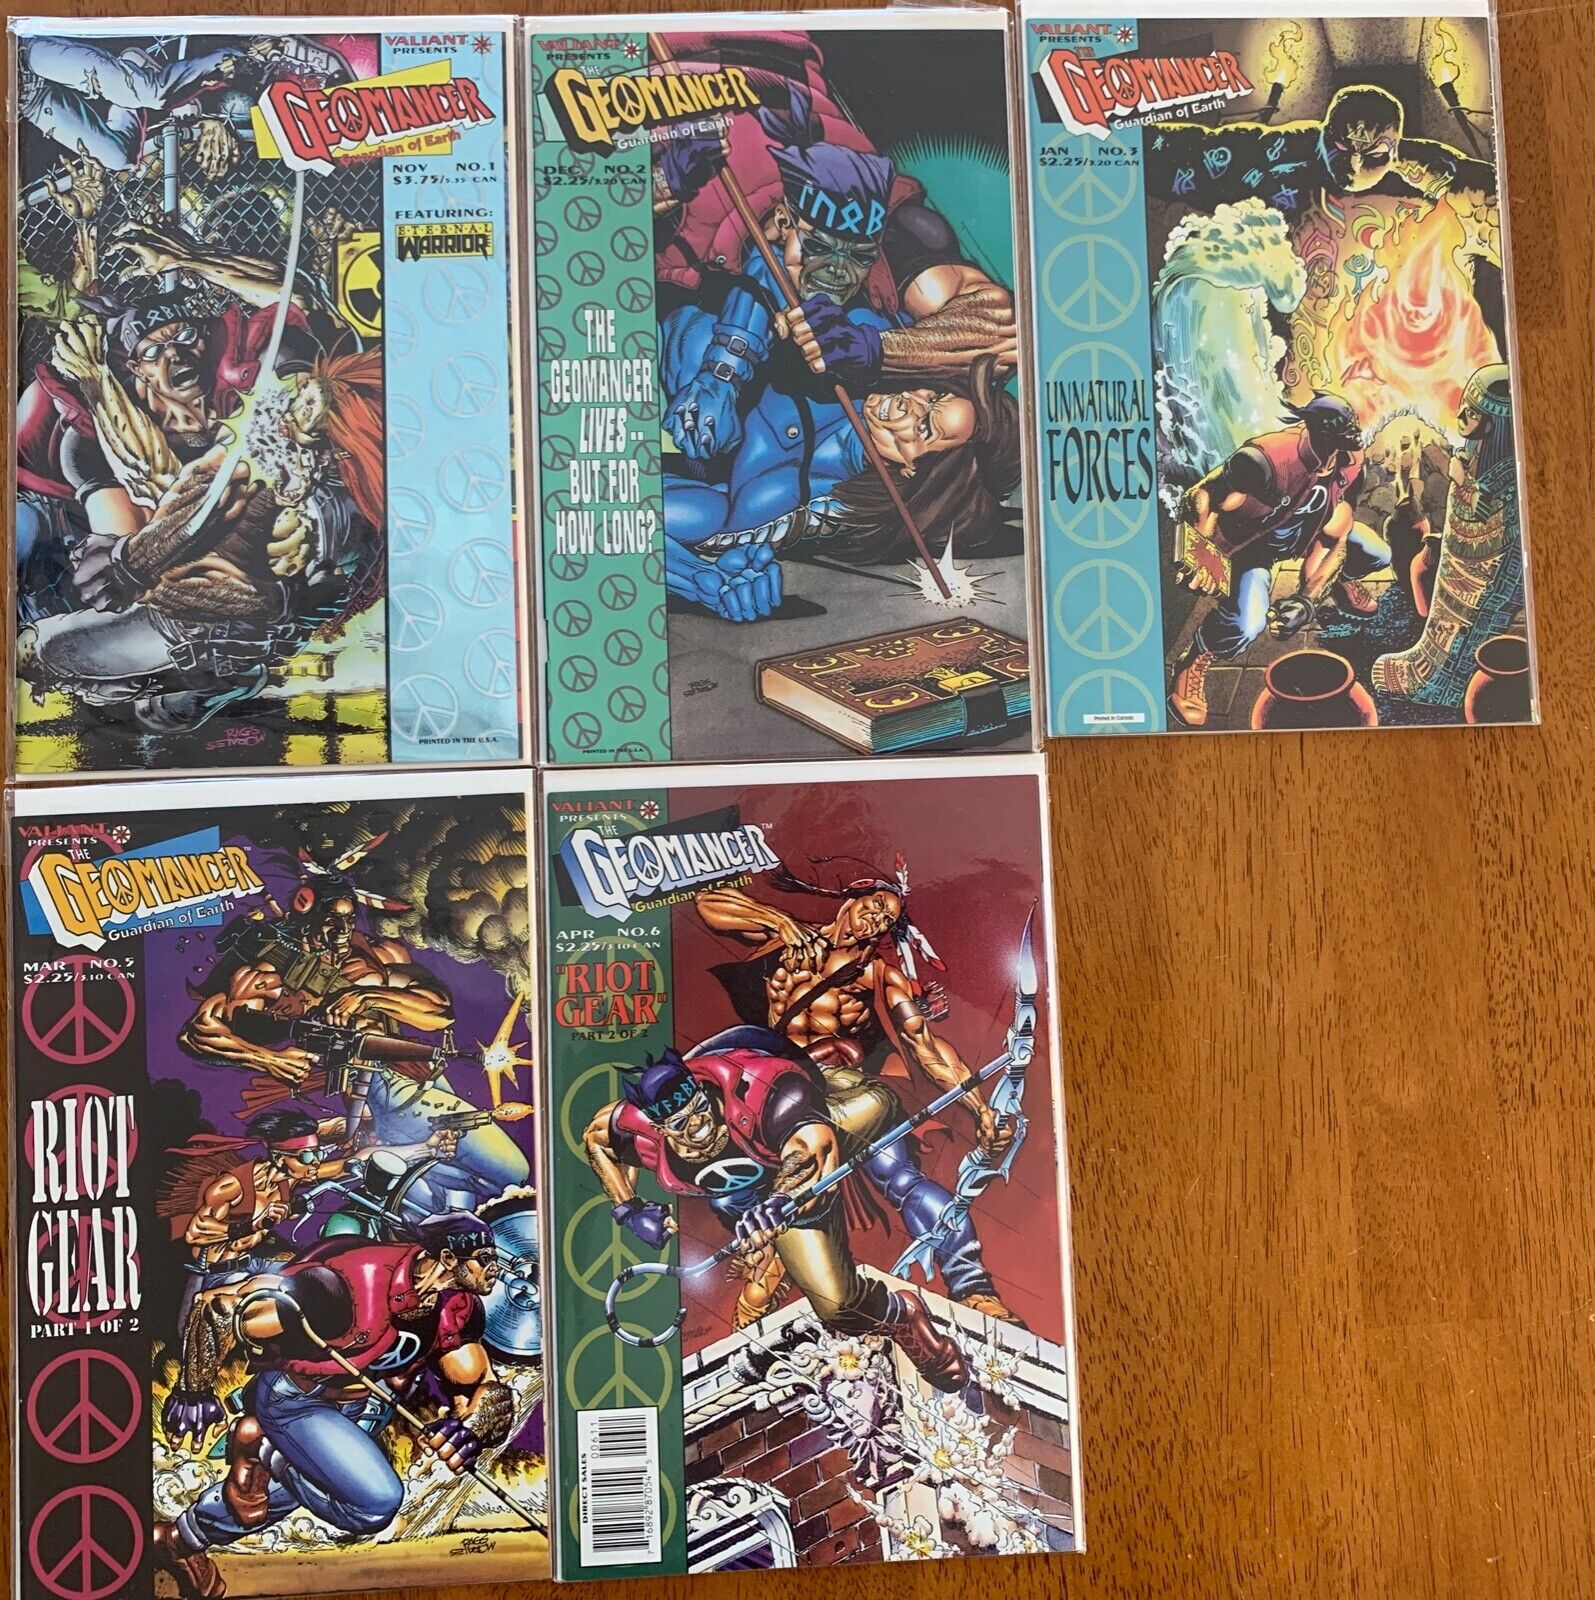 Geomancer by Valiant 1994 - 1995 Lot of 5 Issues 1, 2, 3, 5, and 6